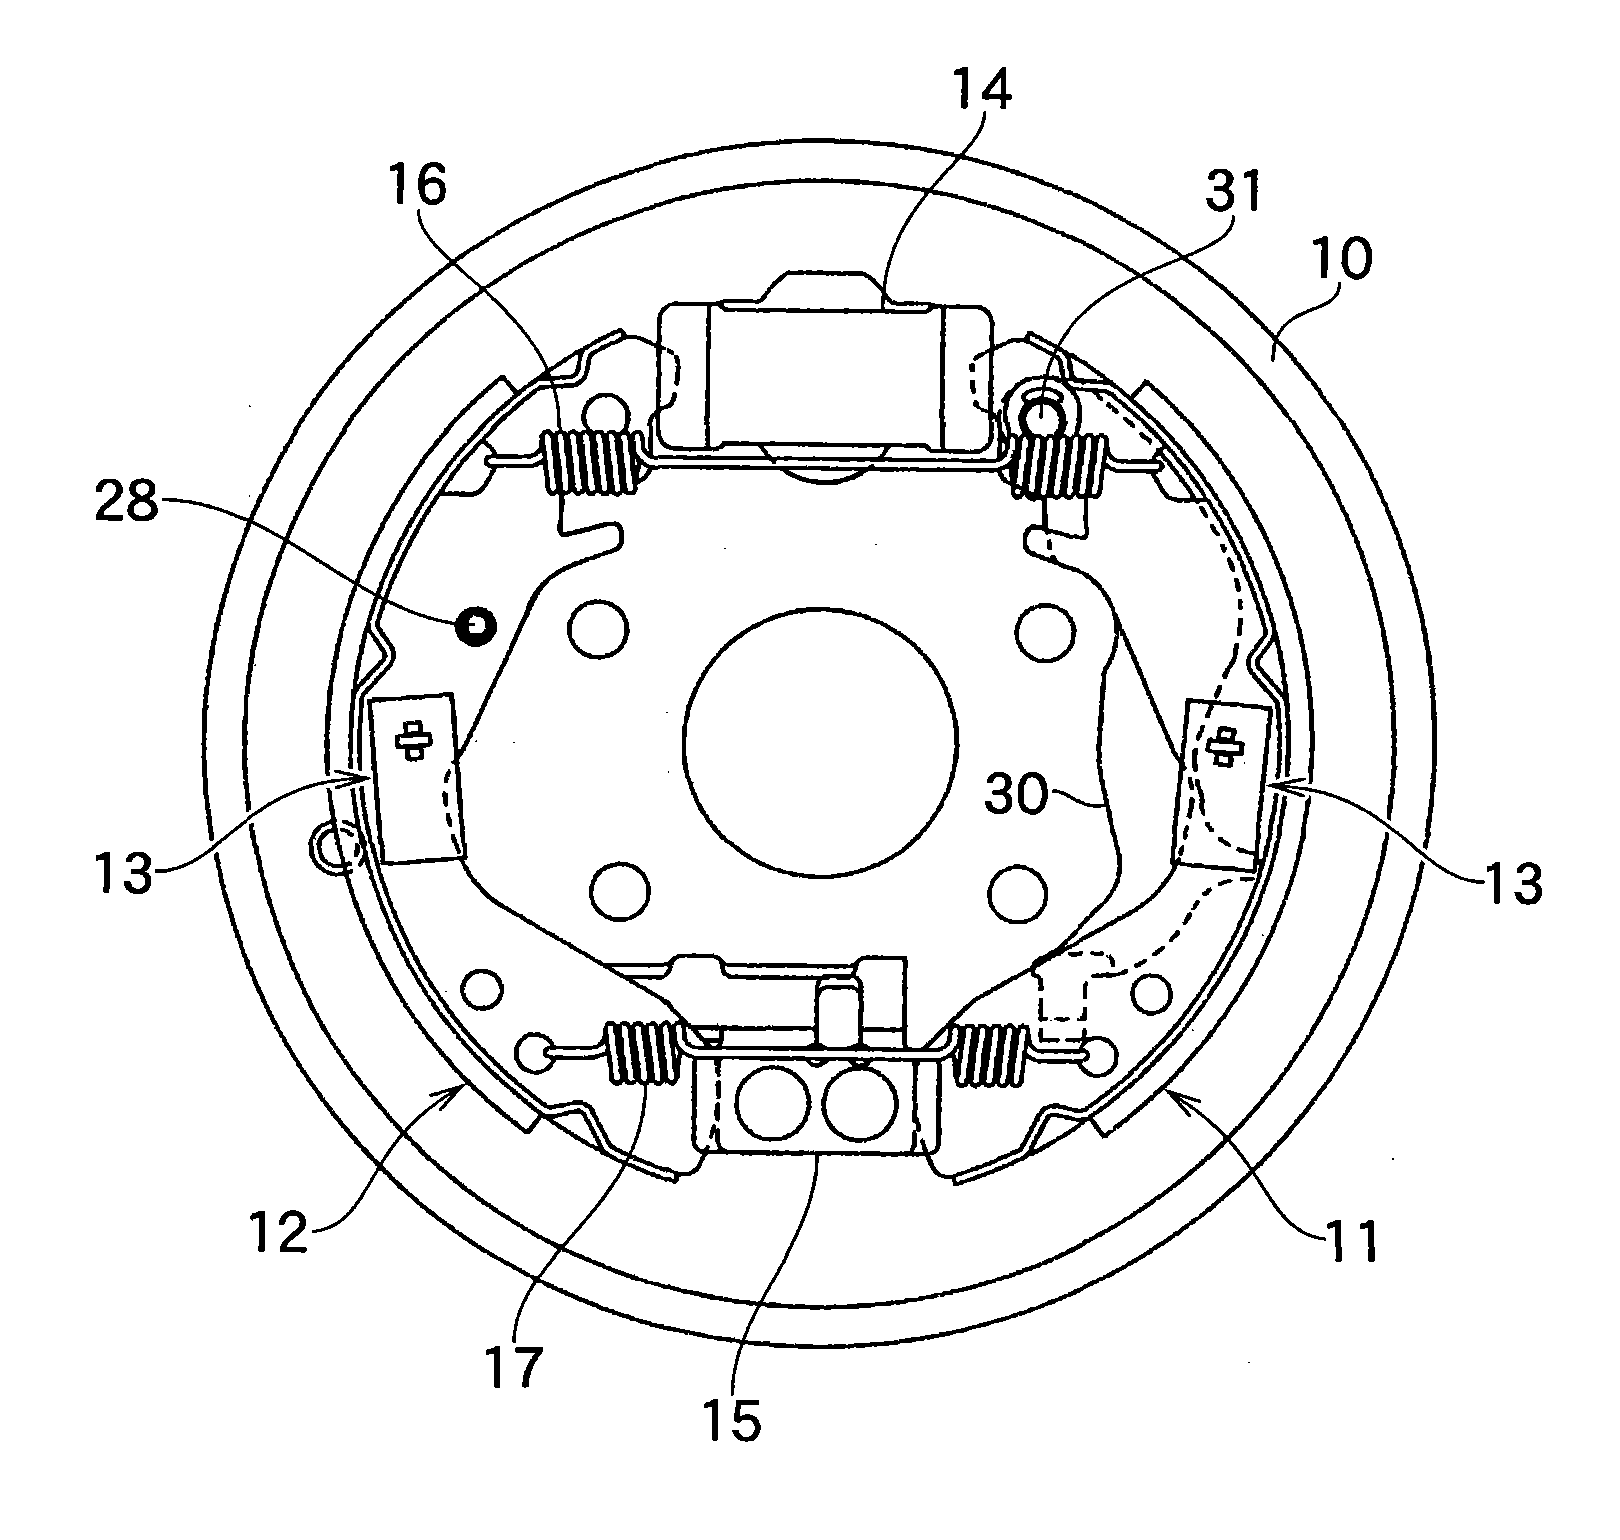 Automatic adjustment device for shoe clearance